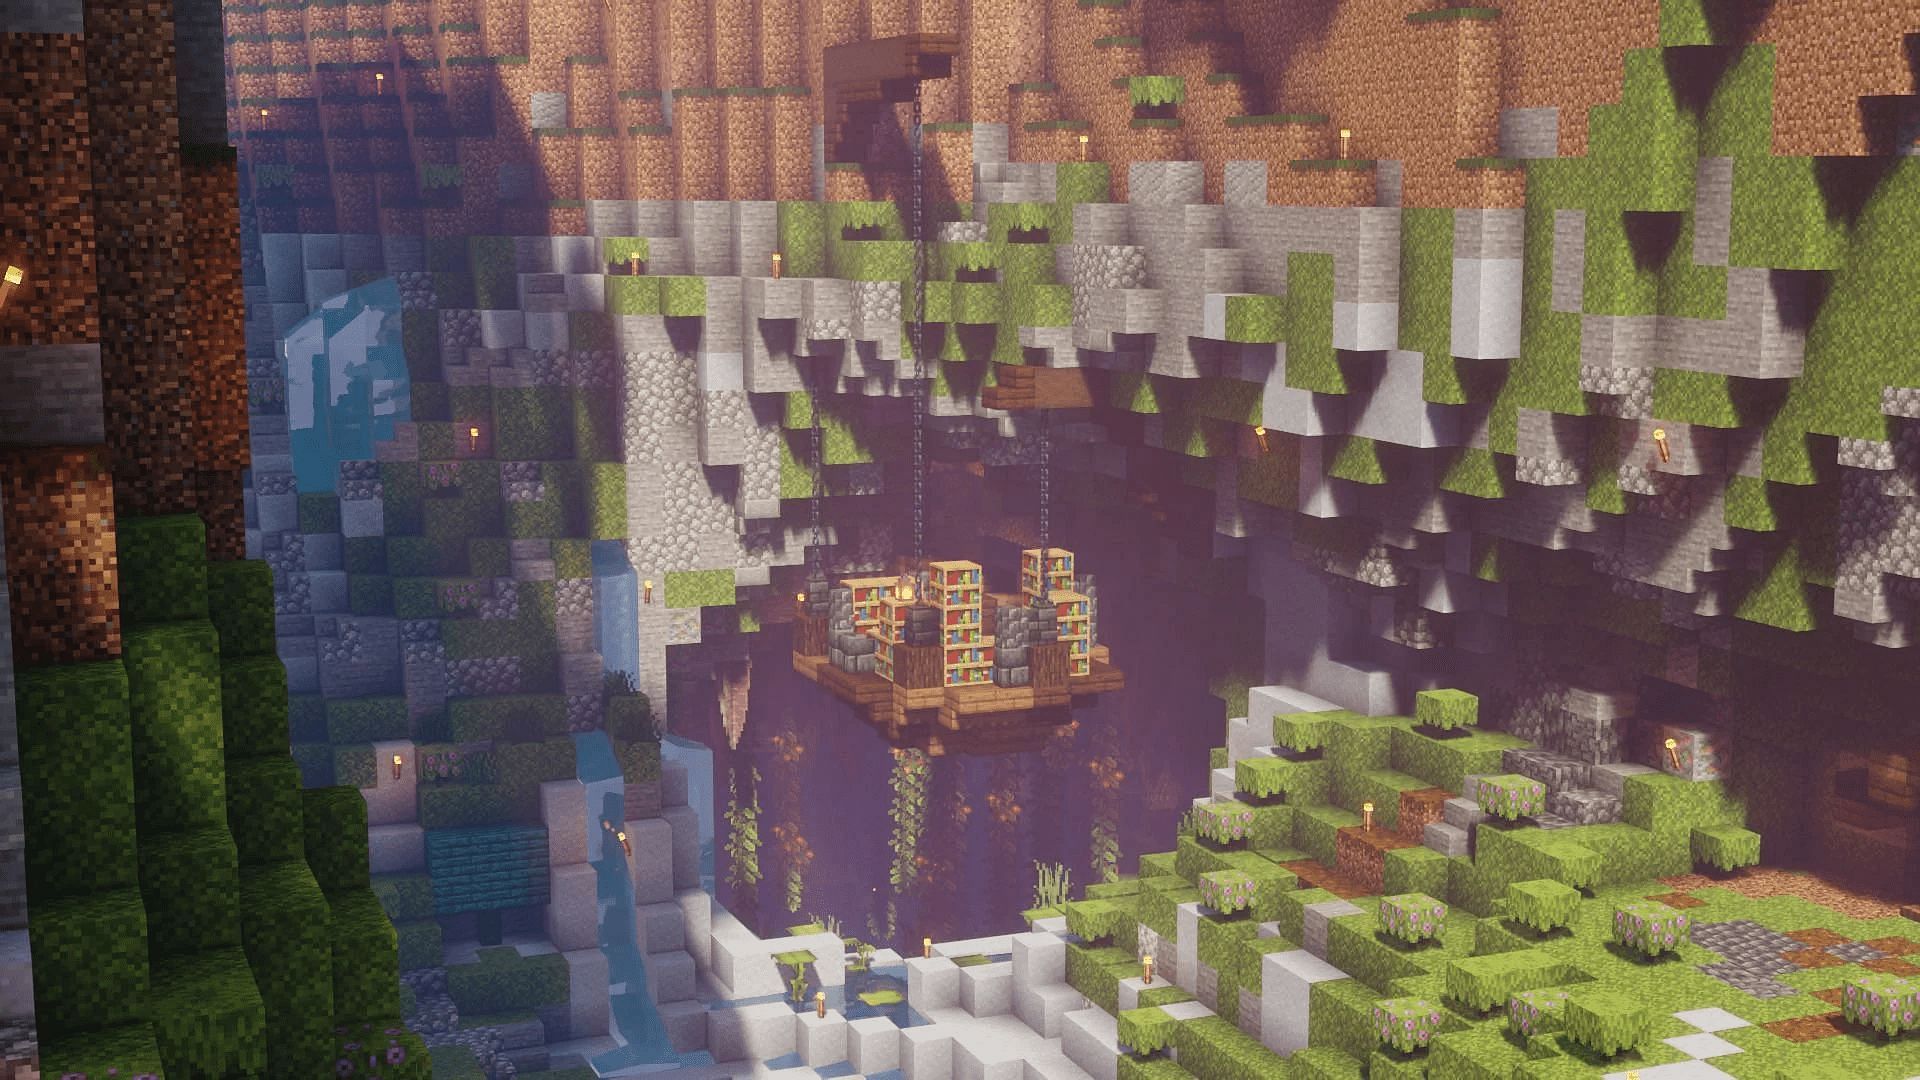 The natural greenery of lush cave biomes accent this Minecraft build perfectly (Image via MrDankoDankins/Reddit)